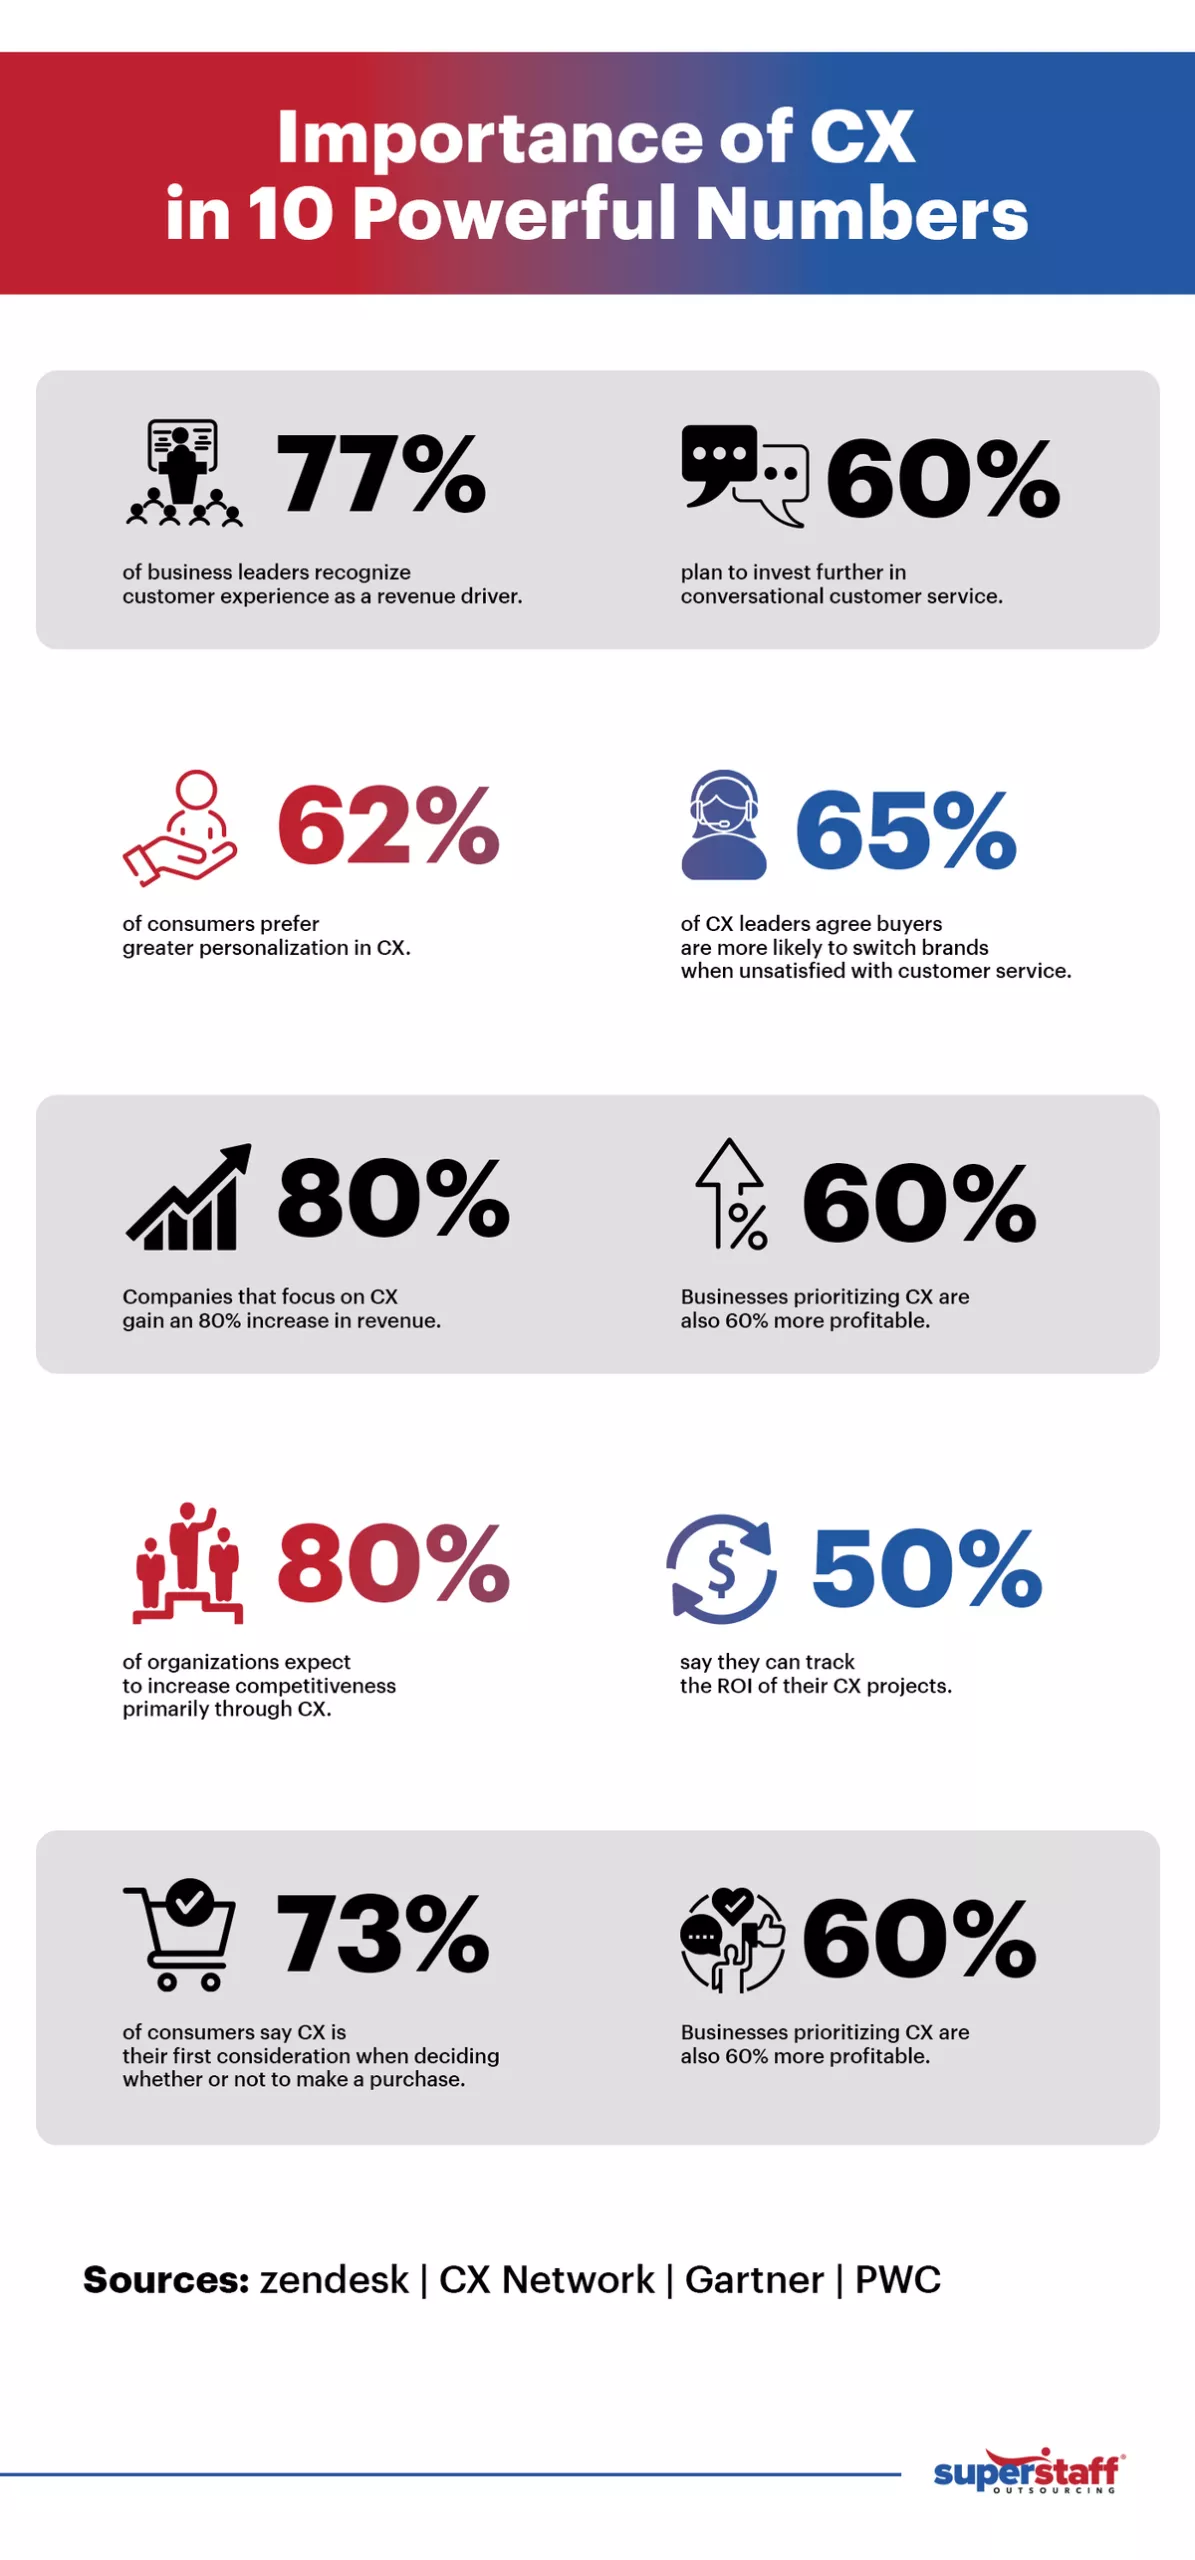 An infographic shows numbers representing the importance of CX for the logistics industry.